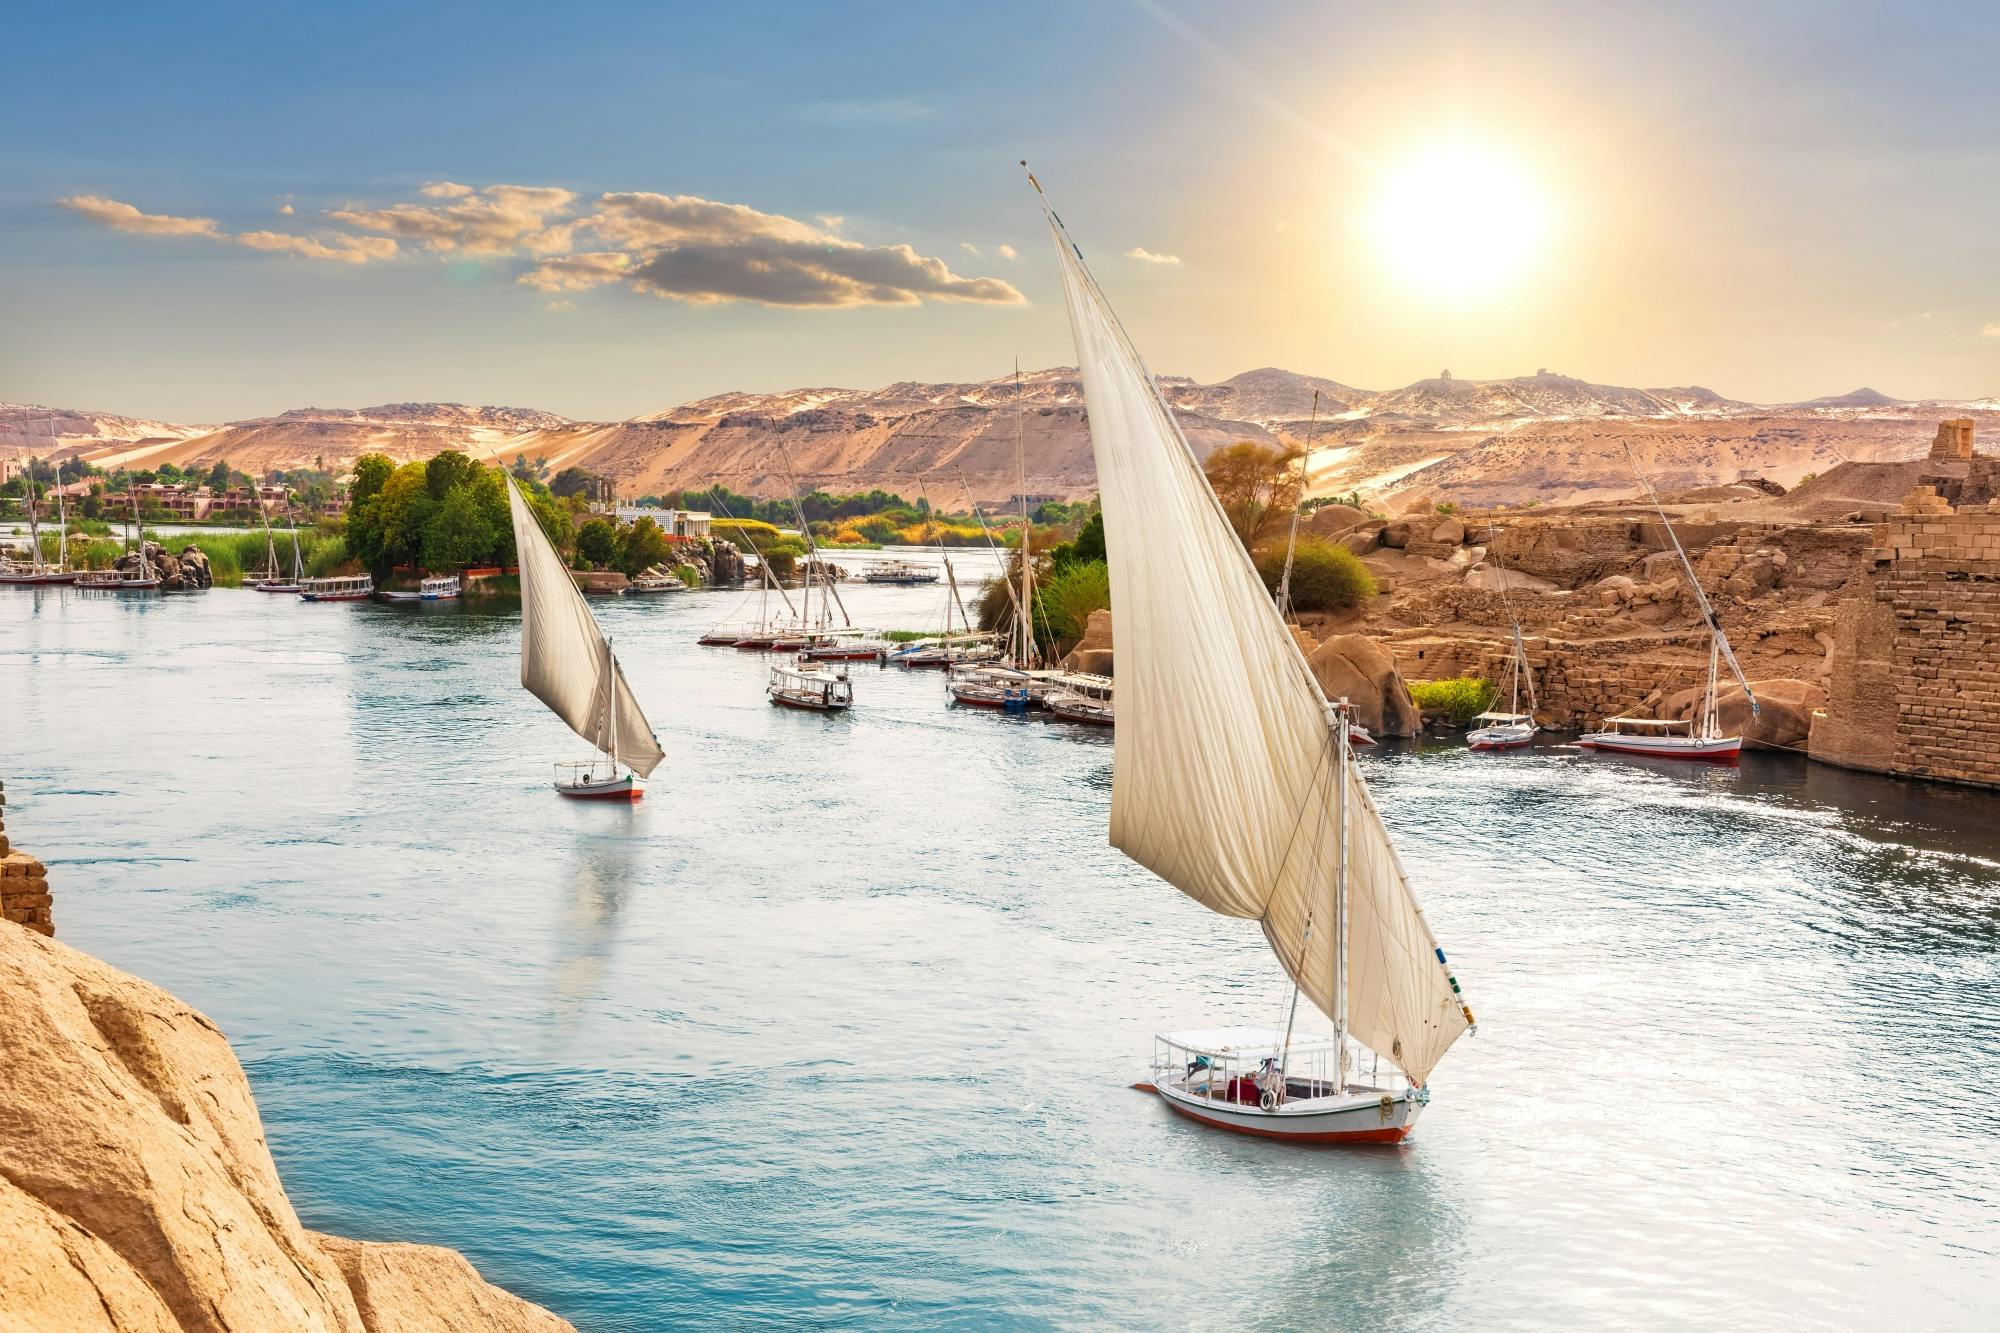 Tombs of the Nobles and Kitcheners Island with a felucca experience